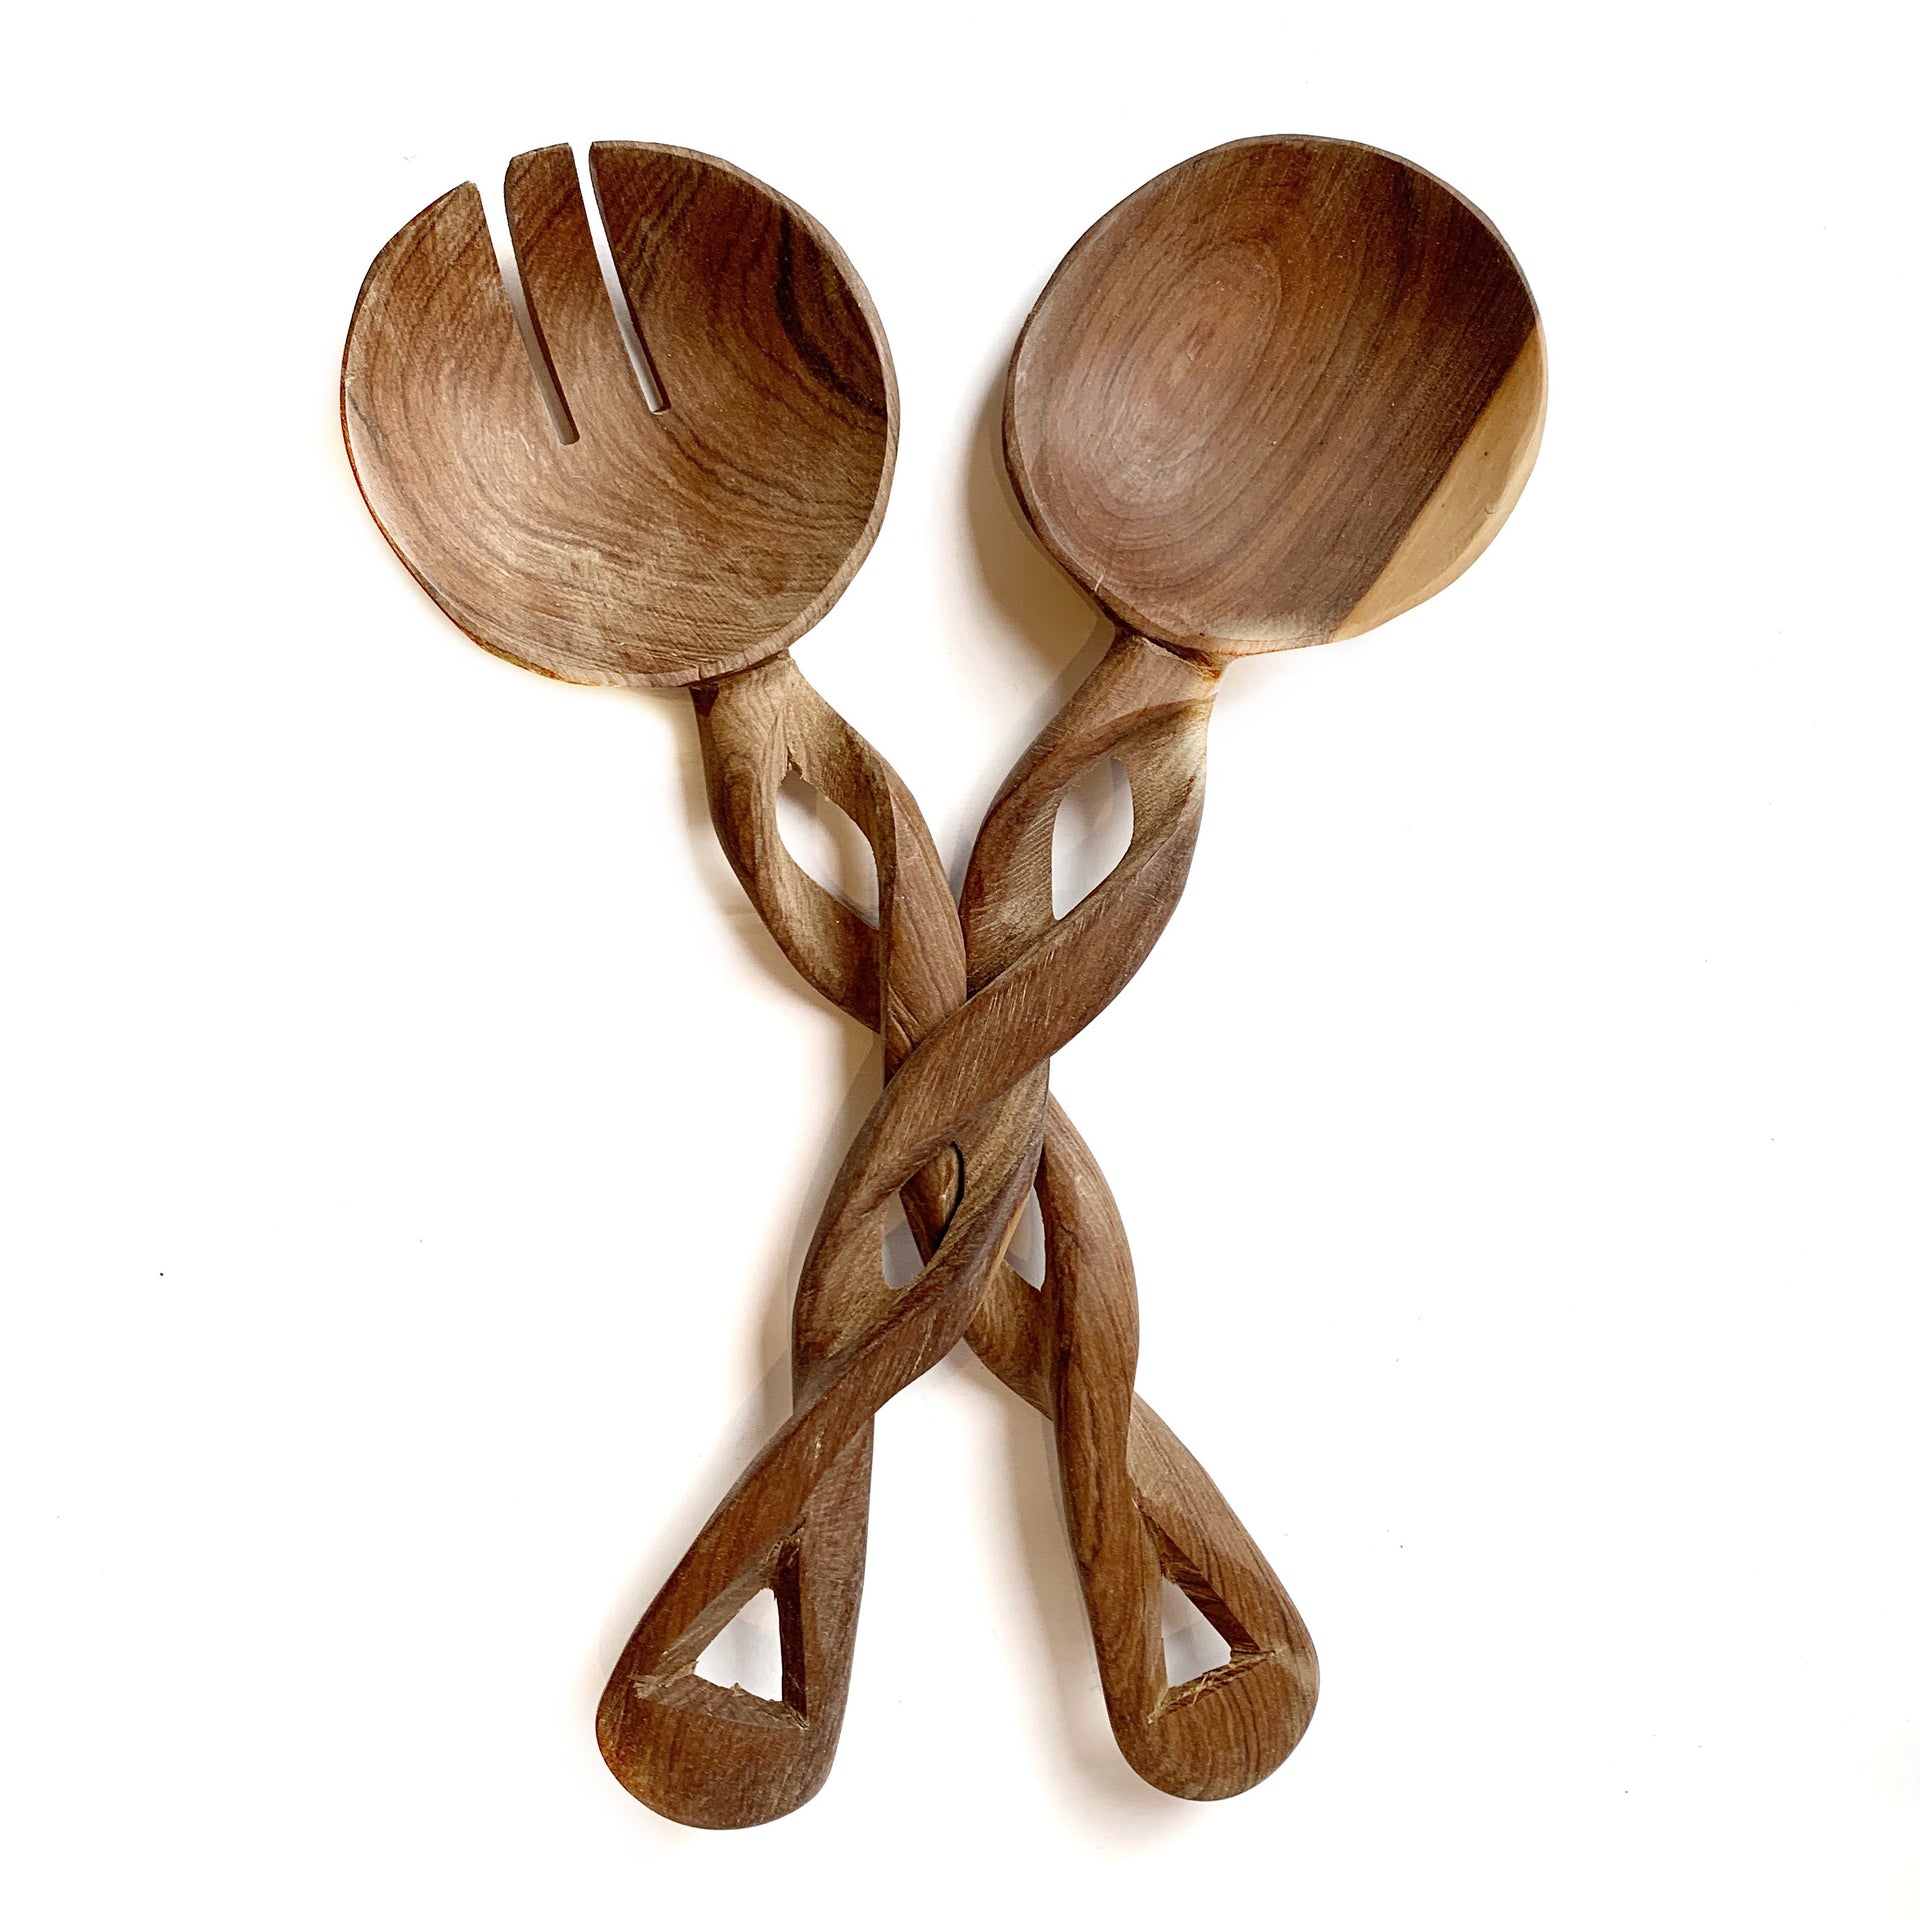 https://ornaments4orphans.org/cdn/shop/products/OliveWoodSpoonsTwistedHandle_1920x.jpg?v=1594230790